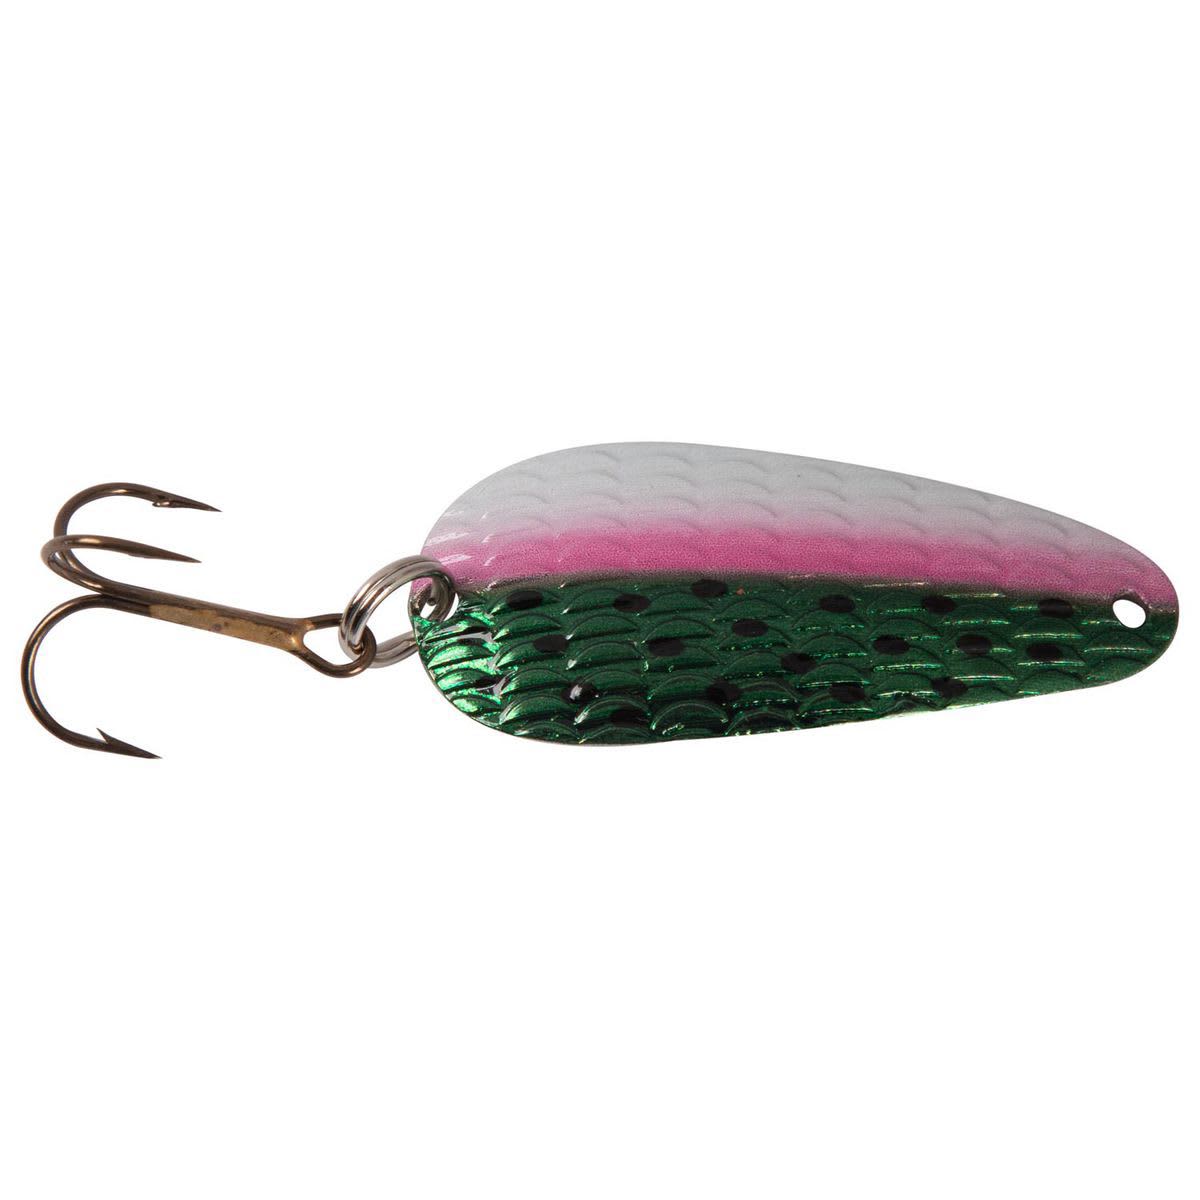 Thomas Lures Cyclone 1/4 oz Trout Fishing Tackle Wobbler Spoon Choice of  Colors